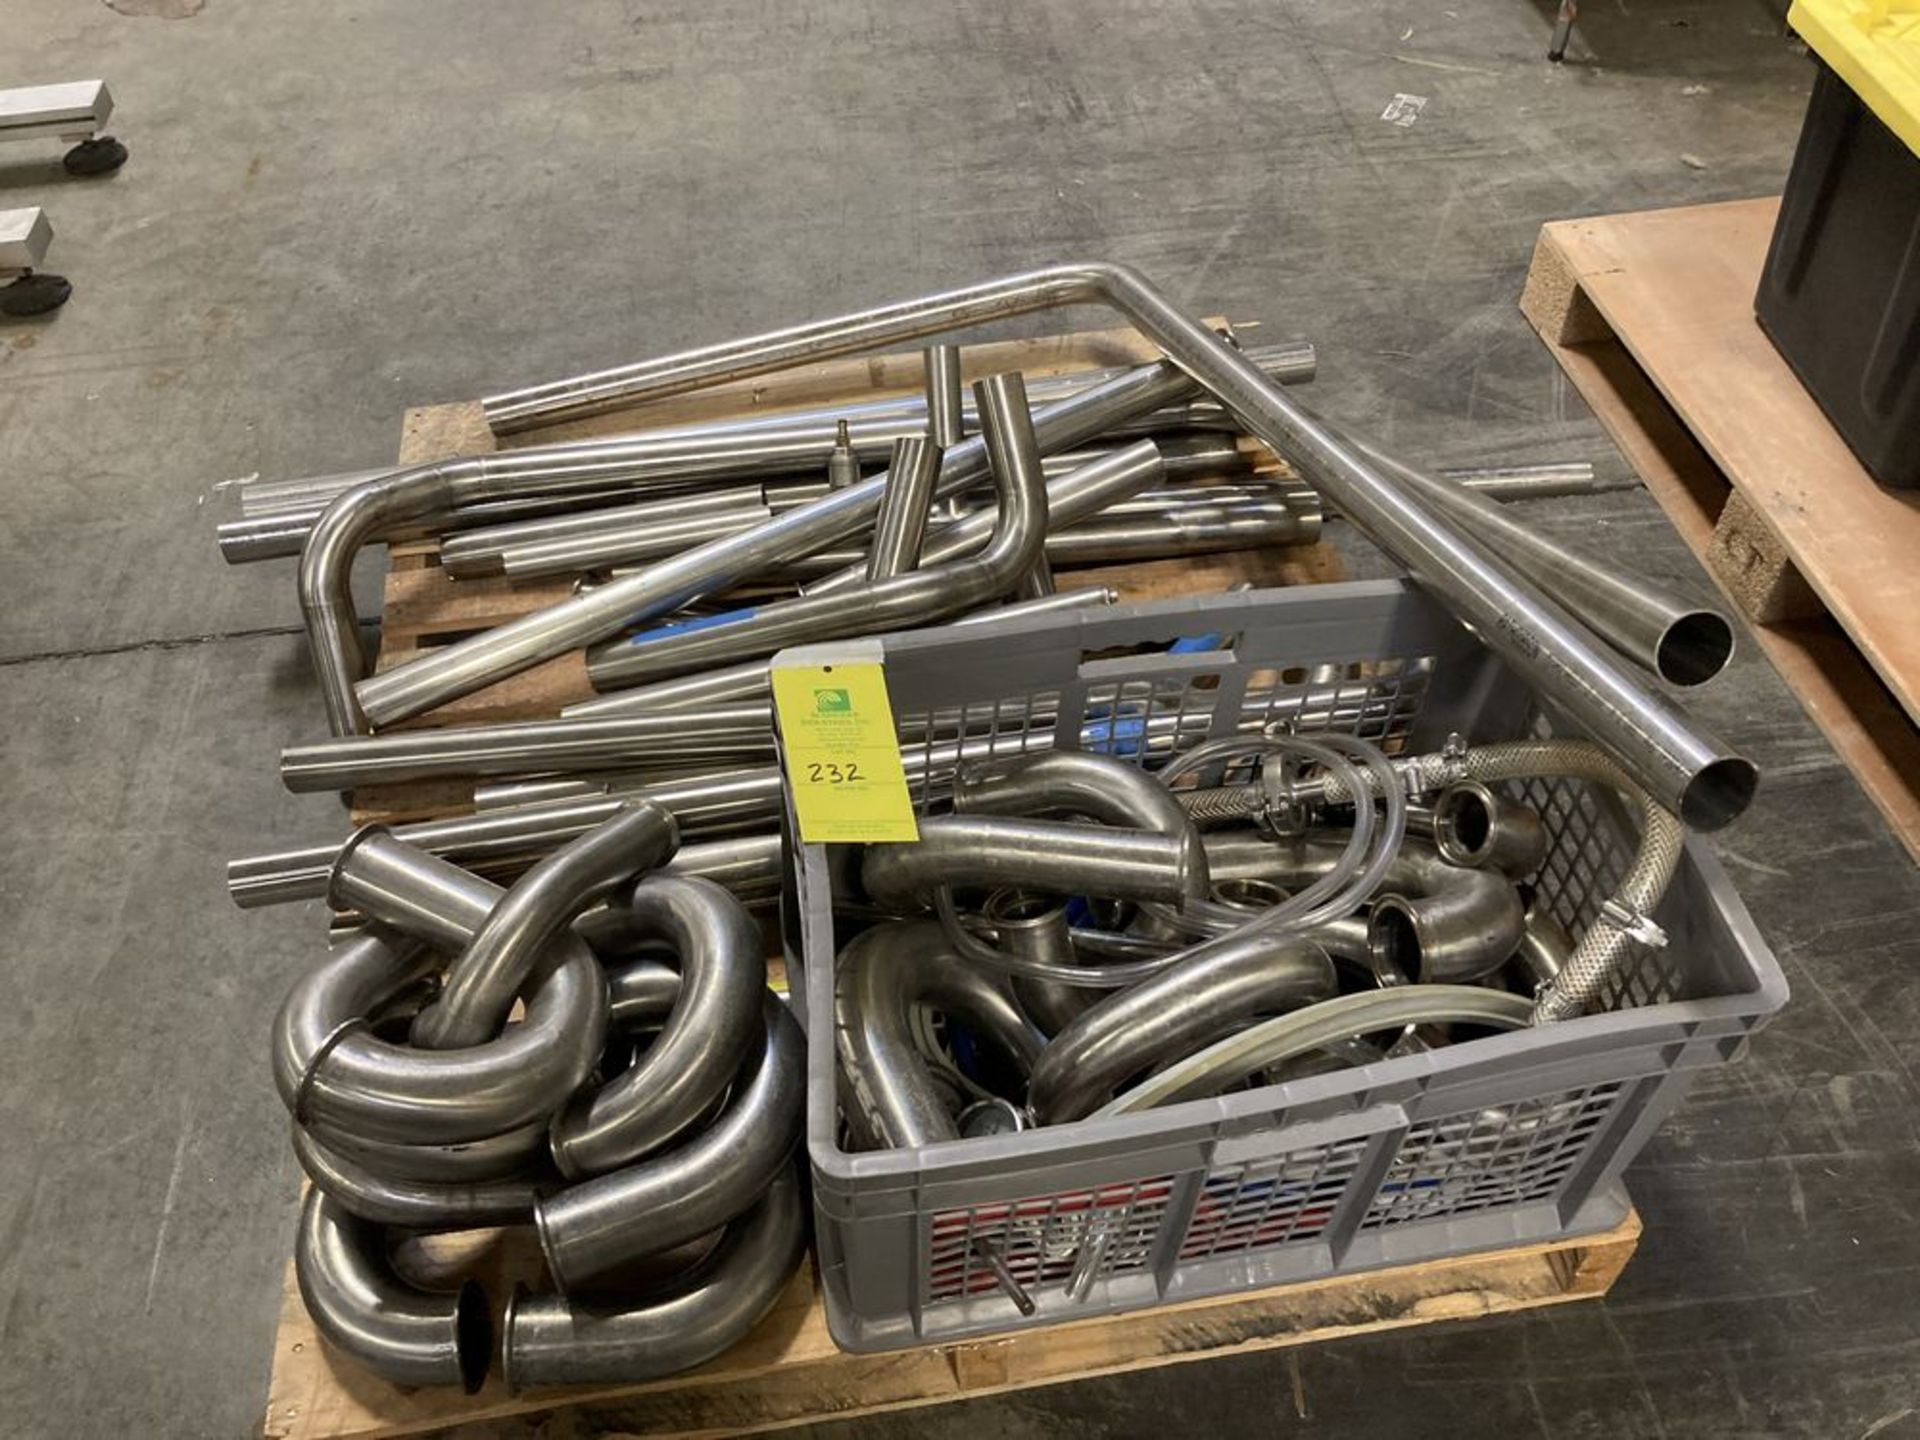 LOT OF PALLET, misc. stainless steel piping. ***Rigging and Loading Fee of $25 to be added to the